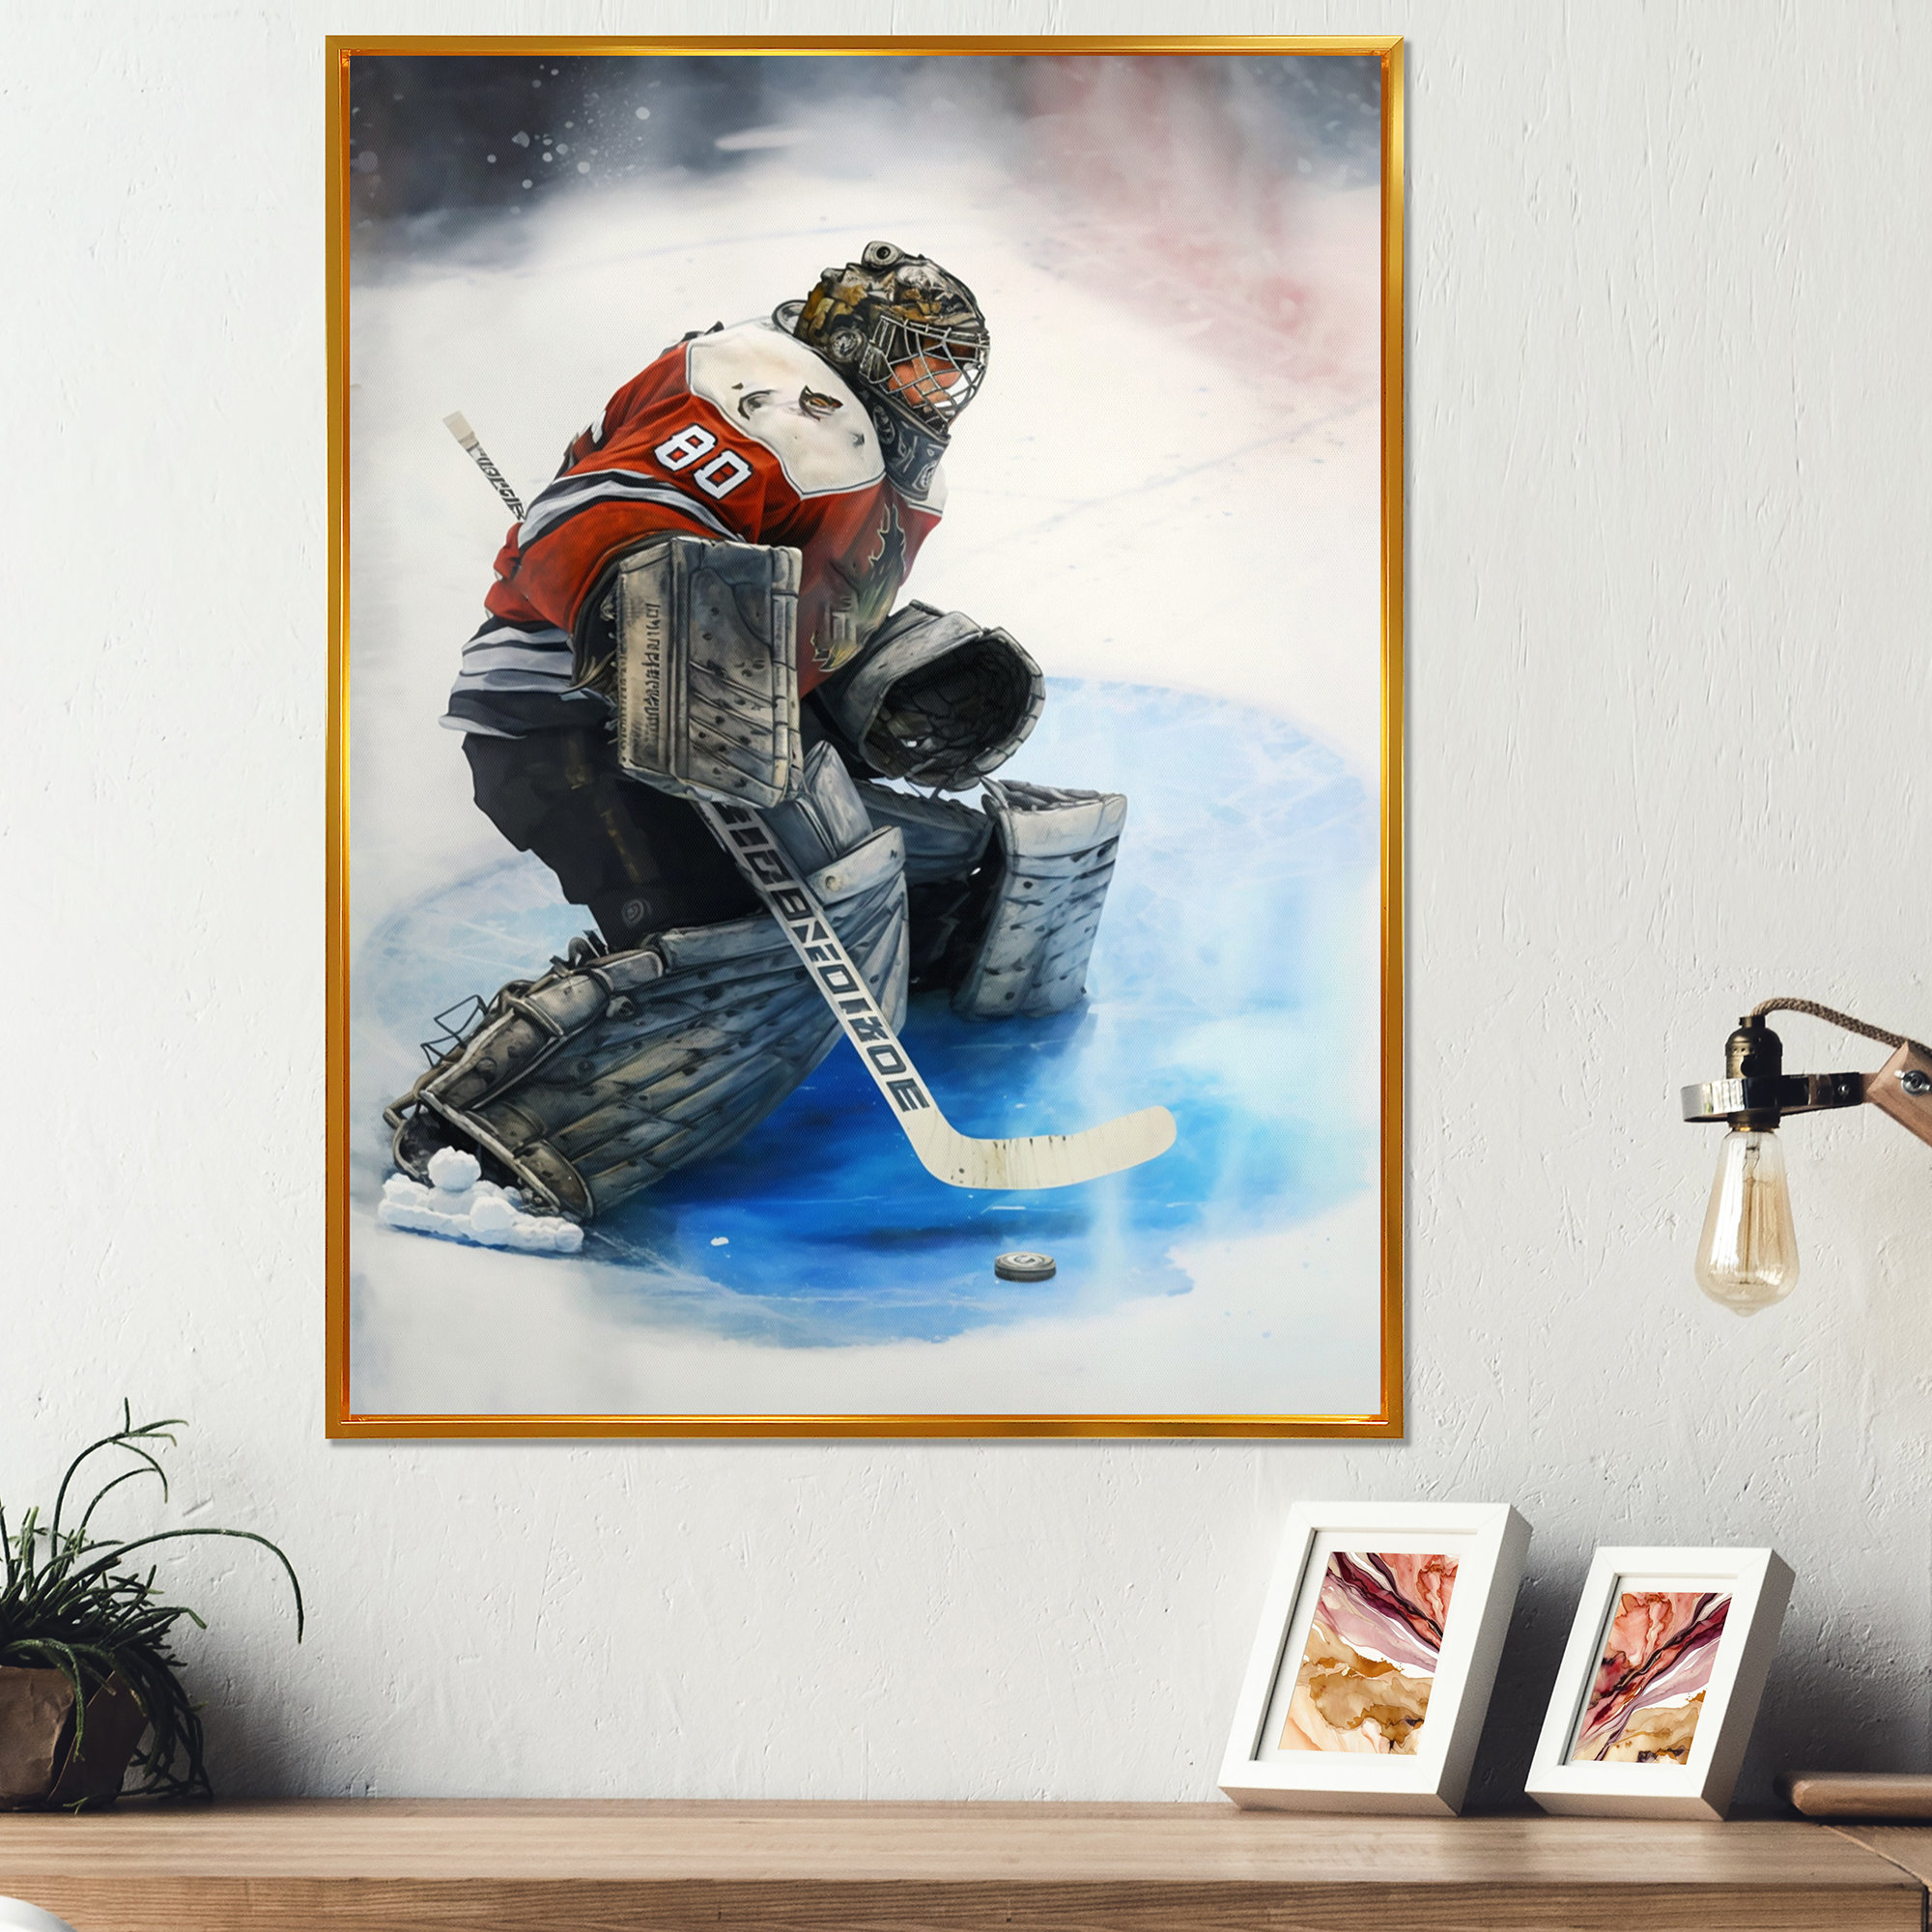 Hockey Goalie During Game I - Graphic Art On Canvas Red Barrel Studio Format: Black Picture Framed, Size: 32 H x 16 W x 1 D